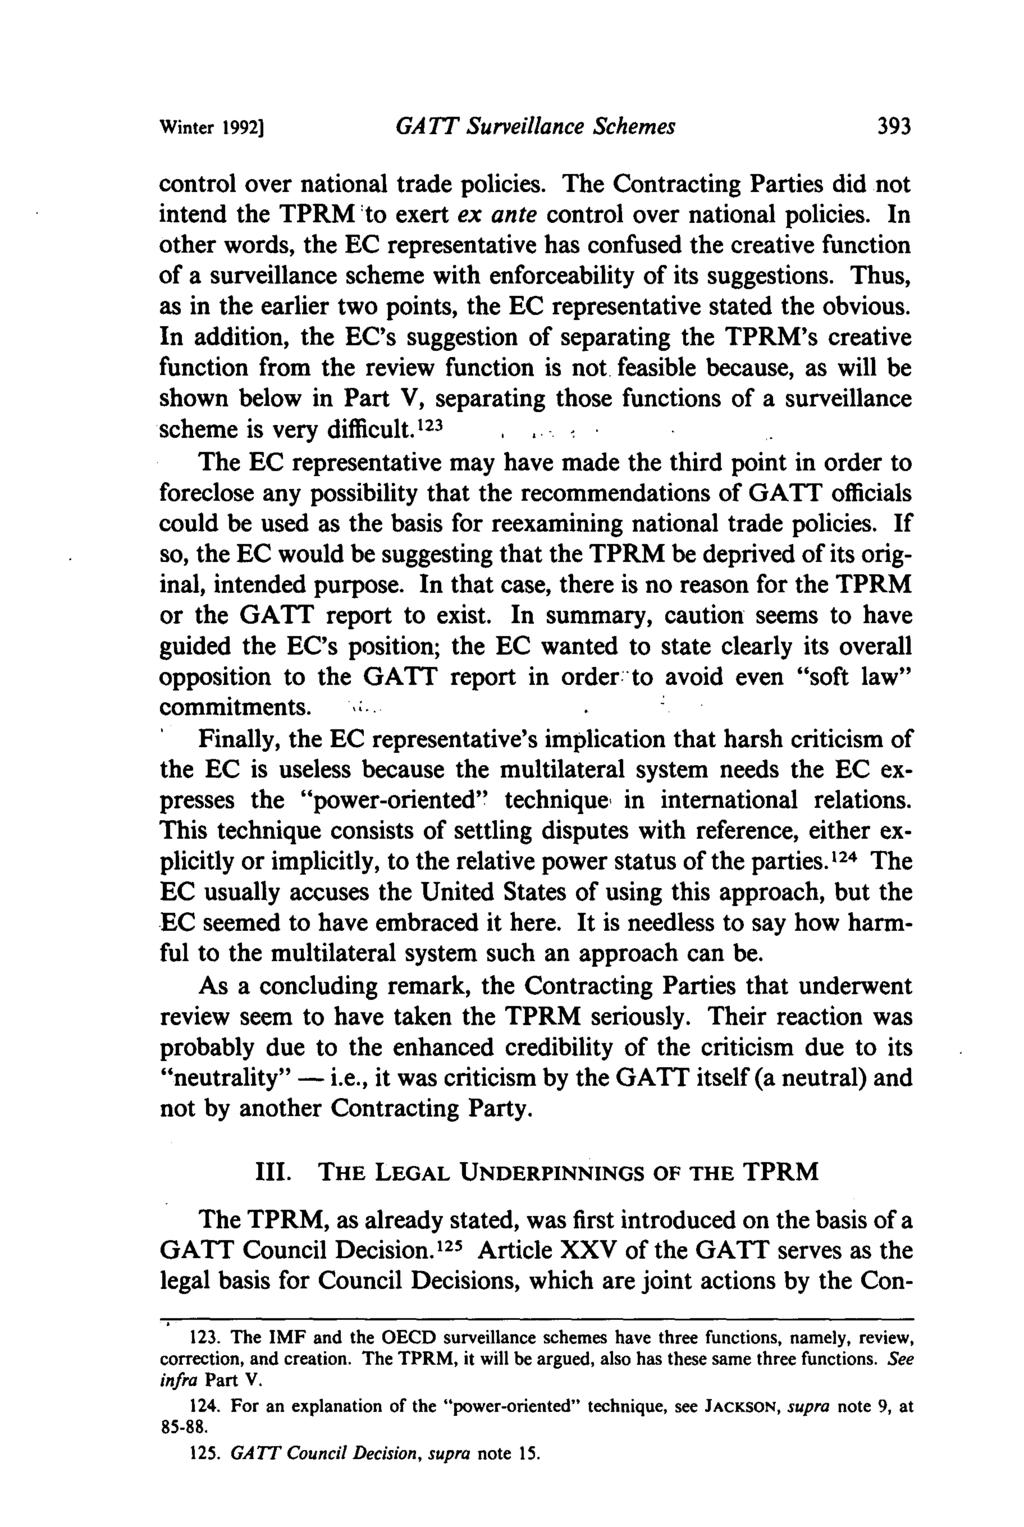 Winter 1992) GA TT Surveillance Schemes control over national trade policies. The Contracting Parties did not intend the TPRM :to exert ex ante control over national policies.